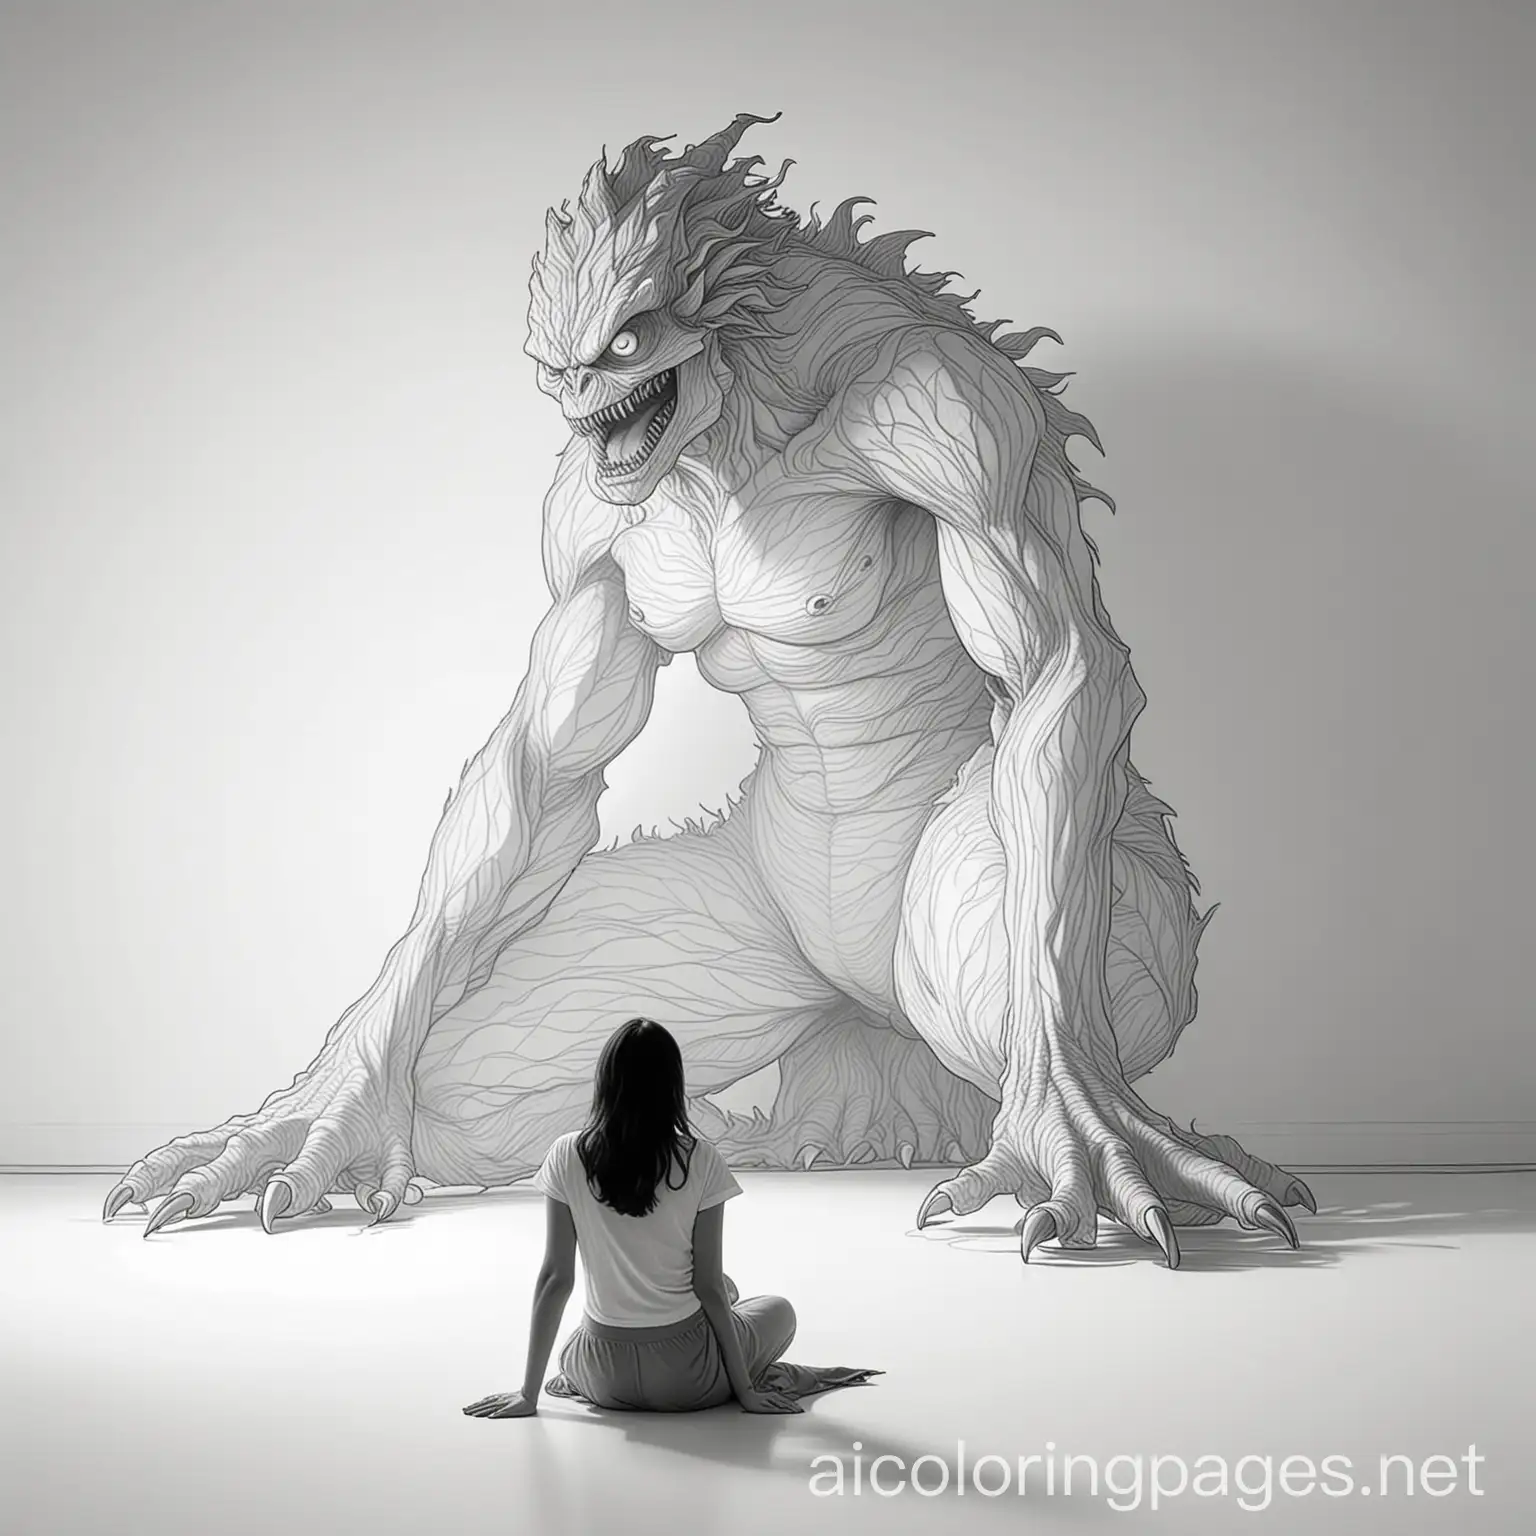 a women sitting on the floor with a large looming monster shadow behind her, Coloring Page, black and white, line art, white background, Simplicity, Ample White Space